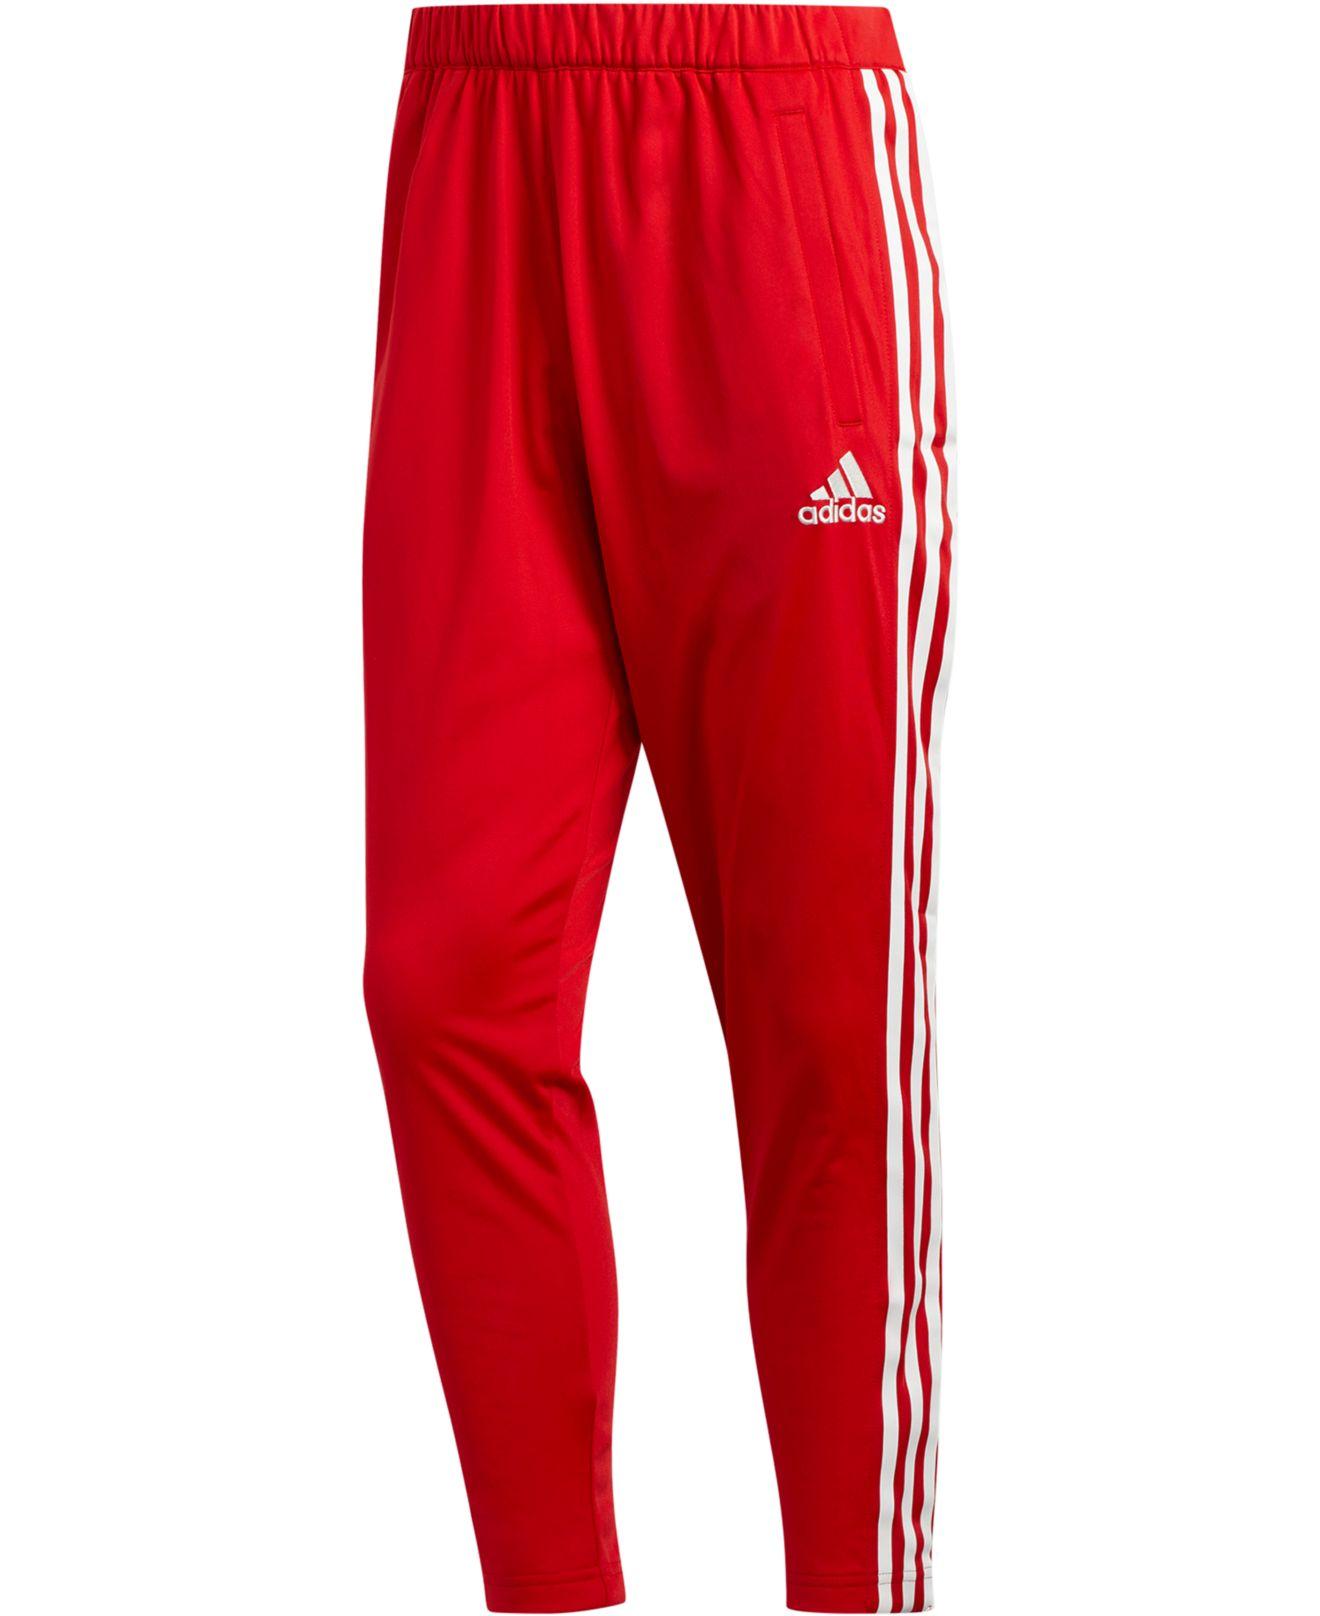 adidas marquee pants